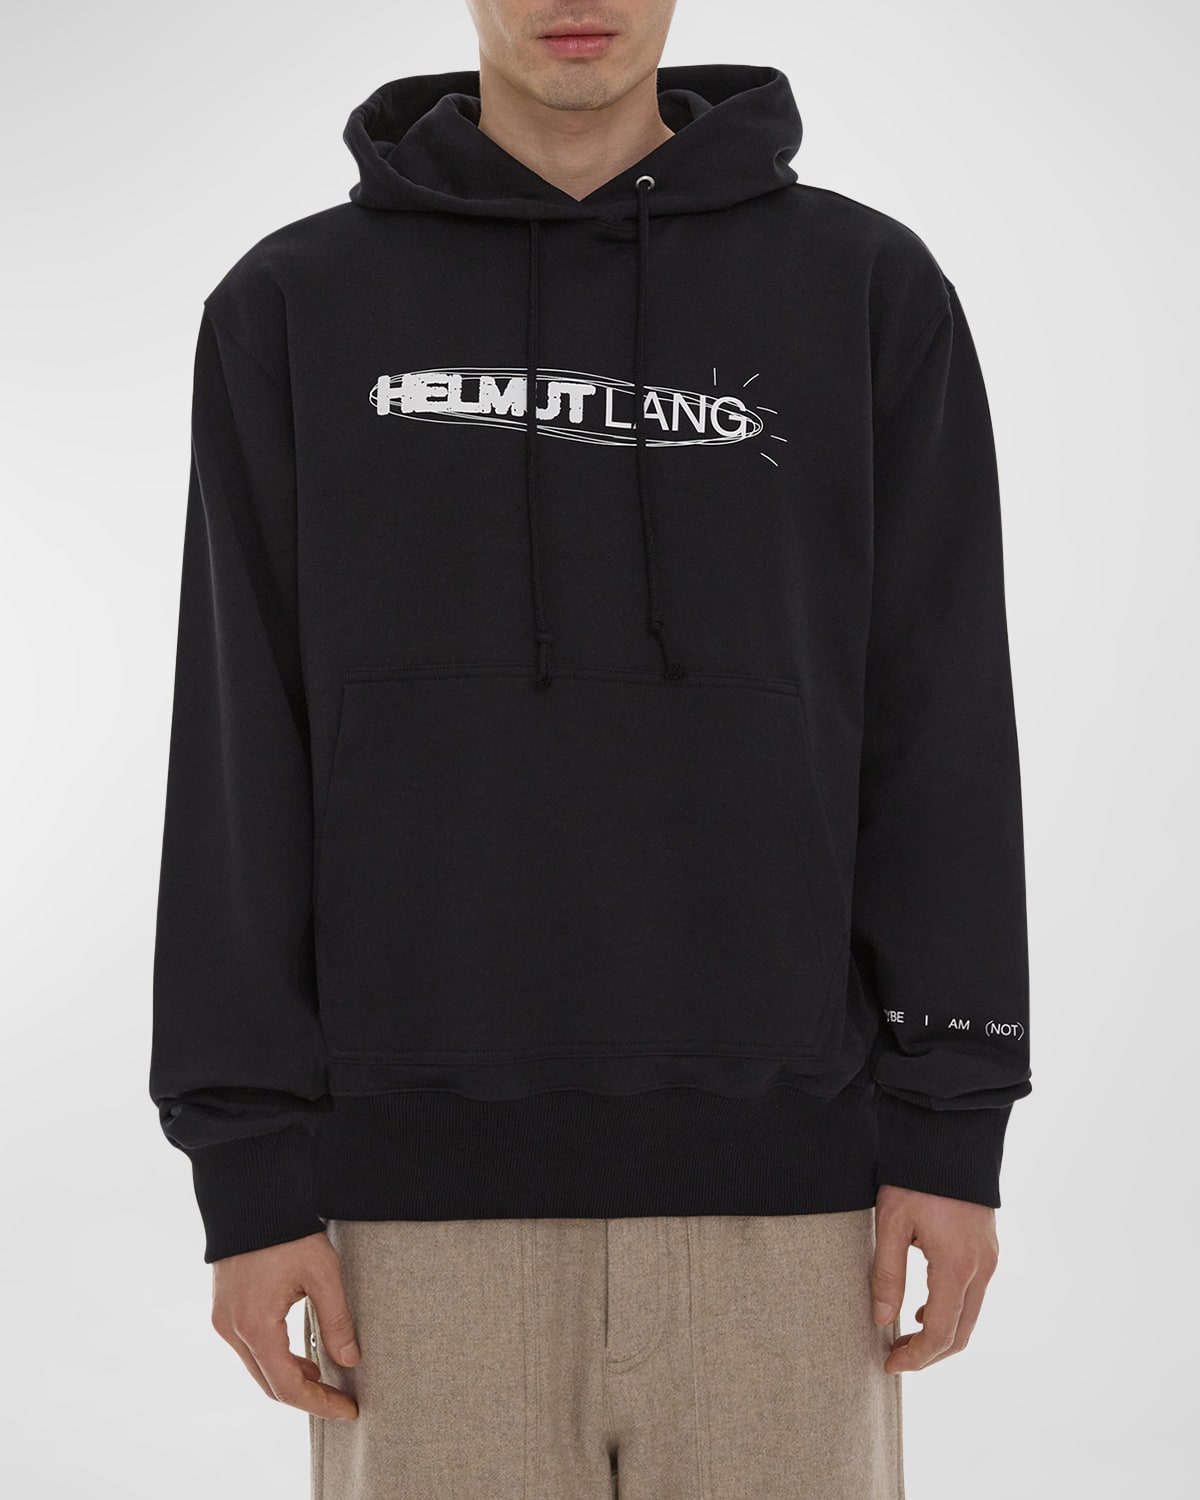 Men's Outer Space Logo Hoodie